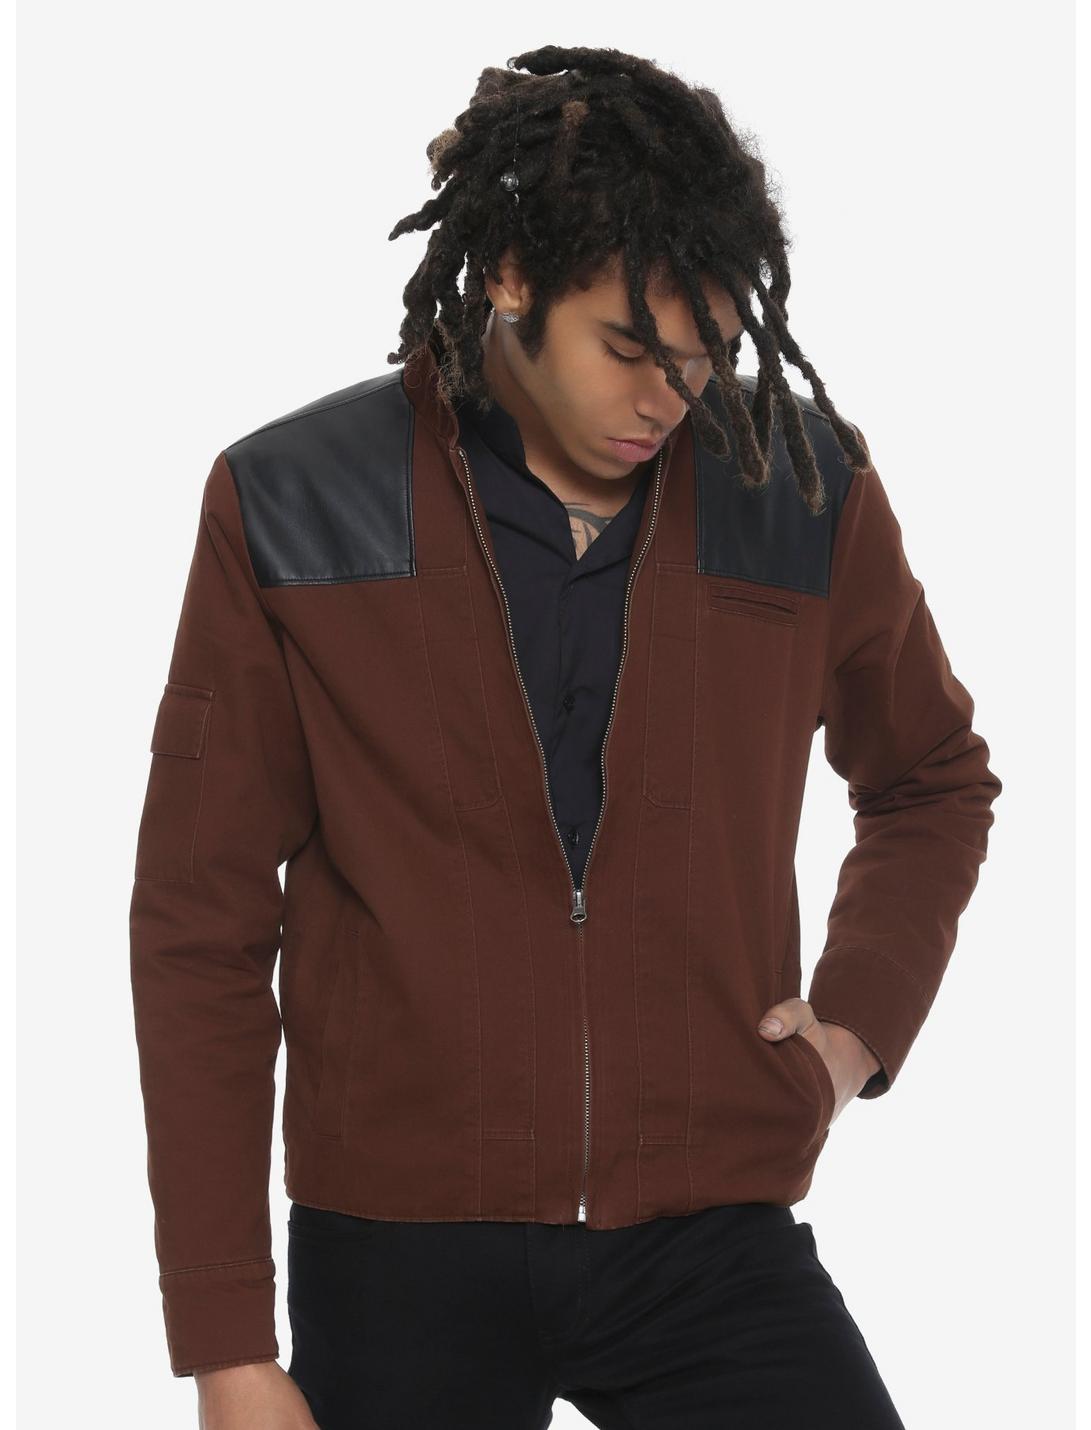 Our Universe Star Wars Solo Brown Jacket, BROWN, hi-res